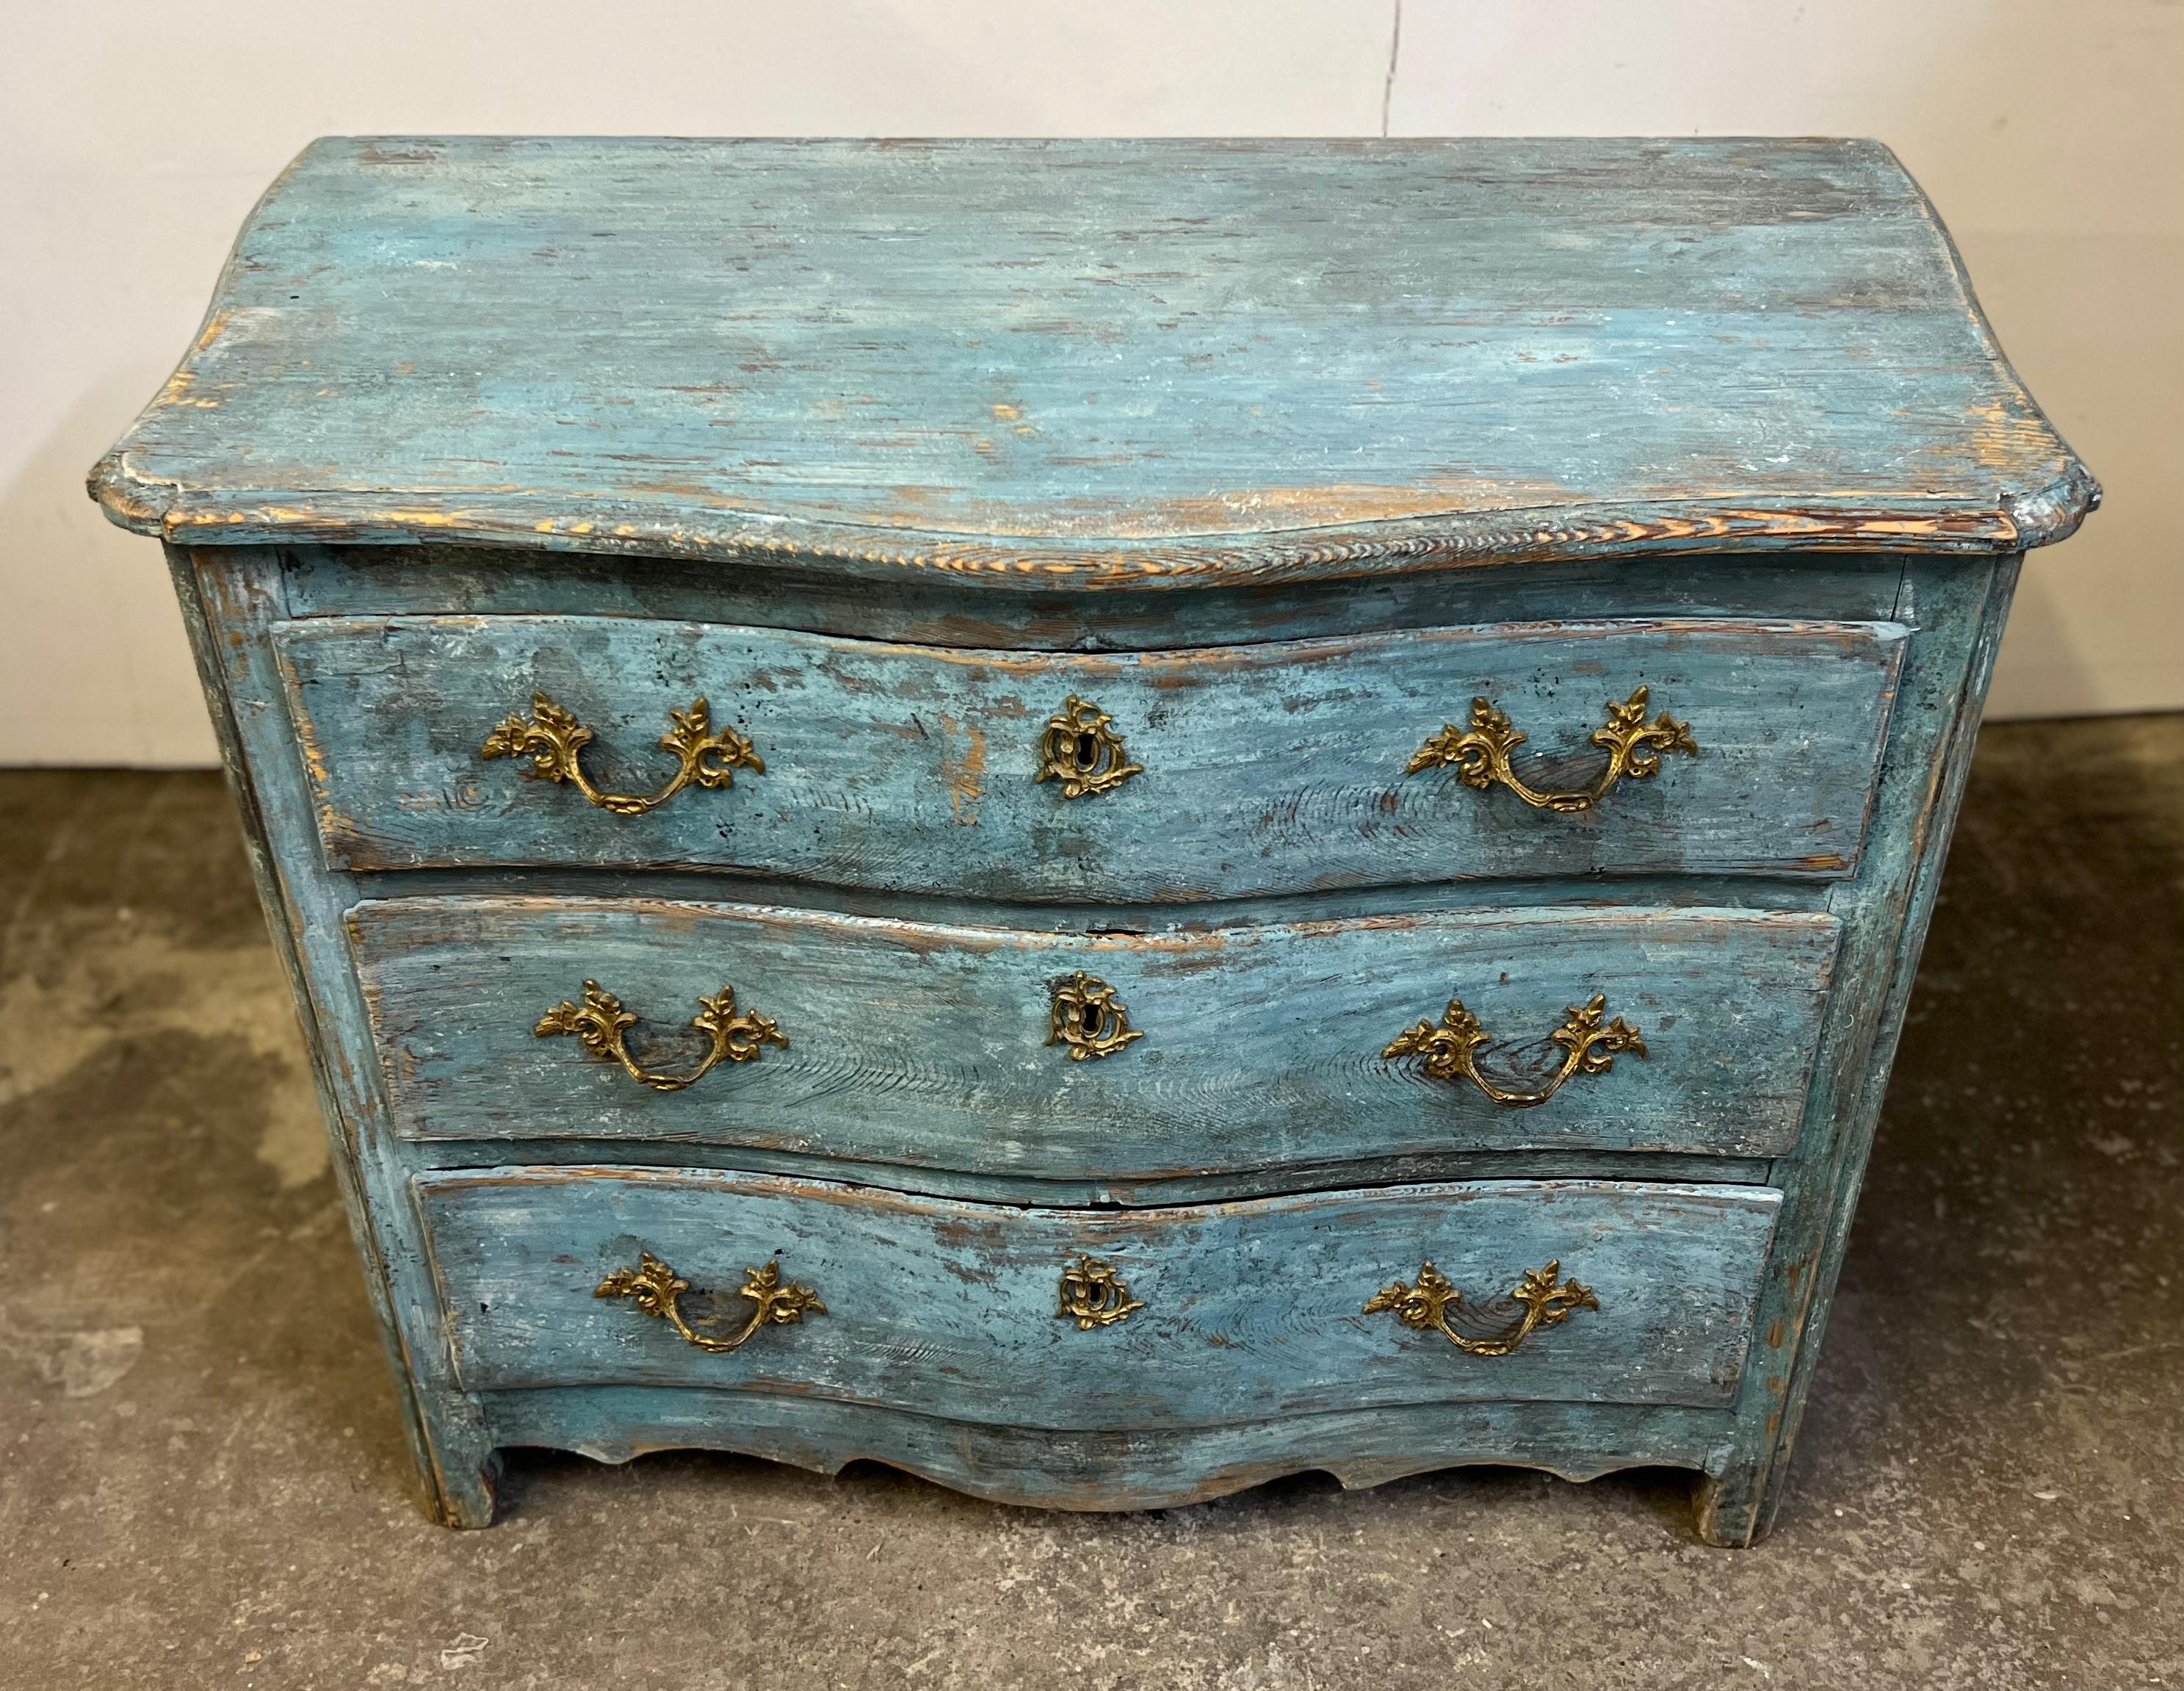 Stunning 19th century original blue painted Rococo commode. This is truly a special heirloom and investment. This piece features original hardware and 4 drawers. This is perfect for any setting whether it be a traditional design space or wabi sabi